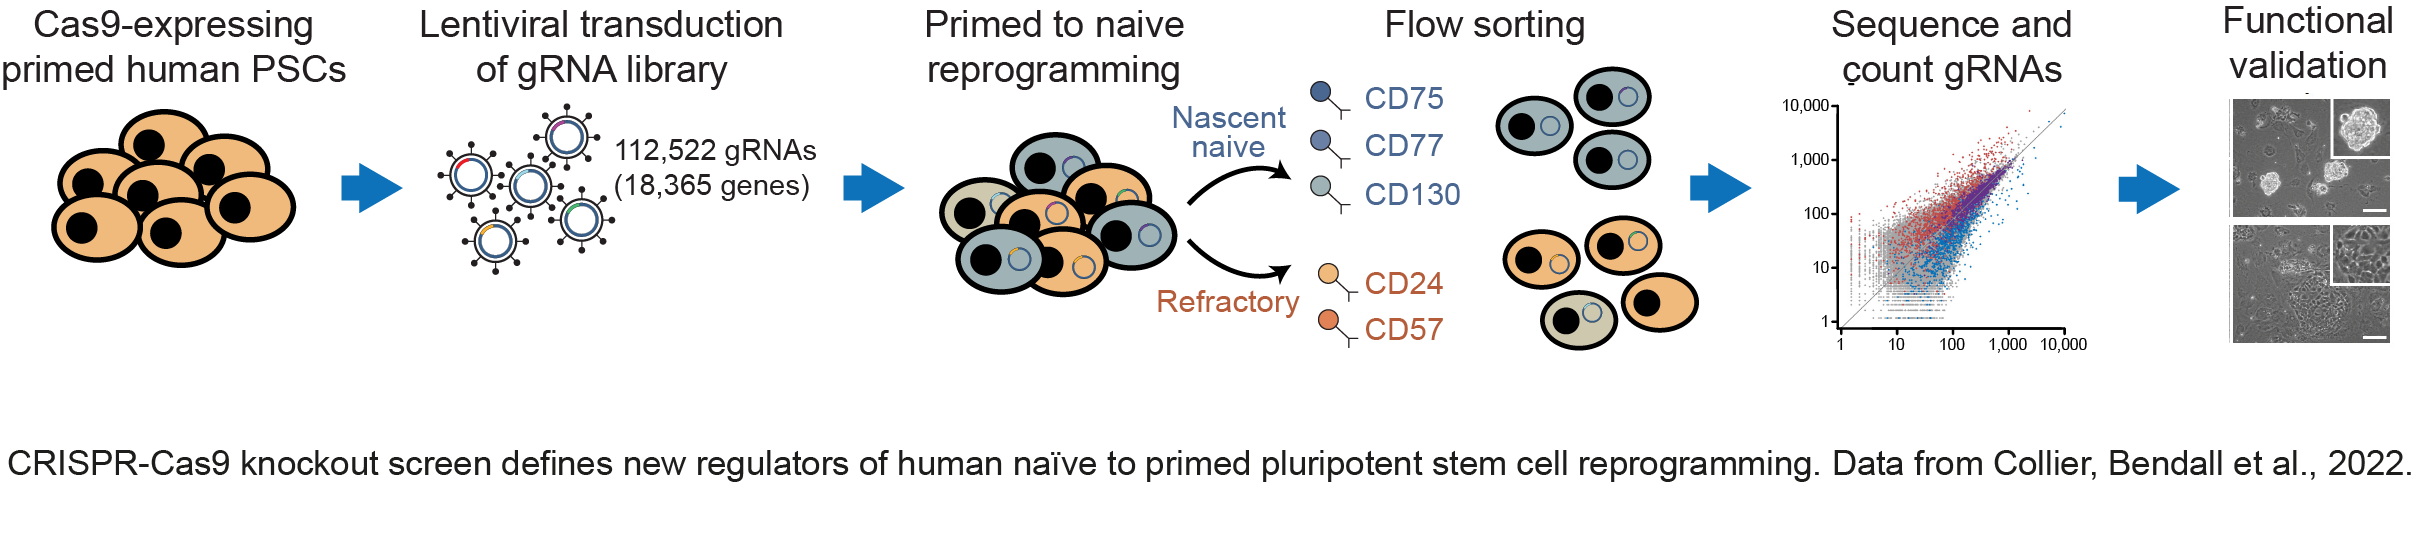 factors that control the transitions between human pluripotent states